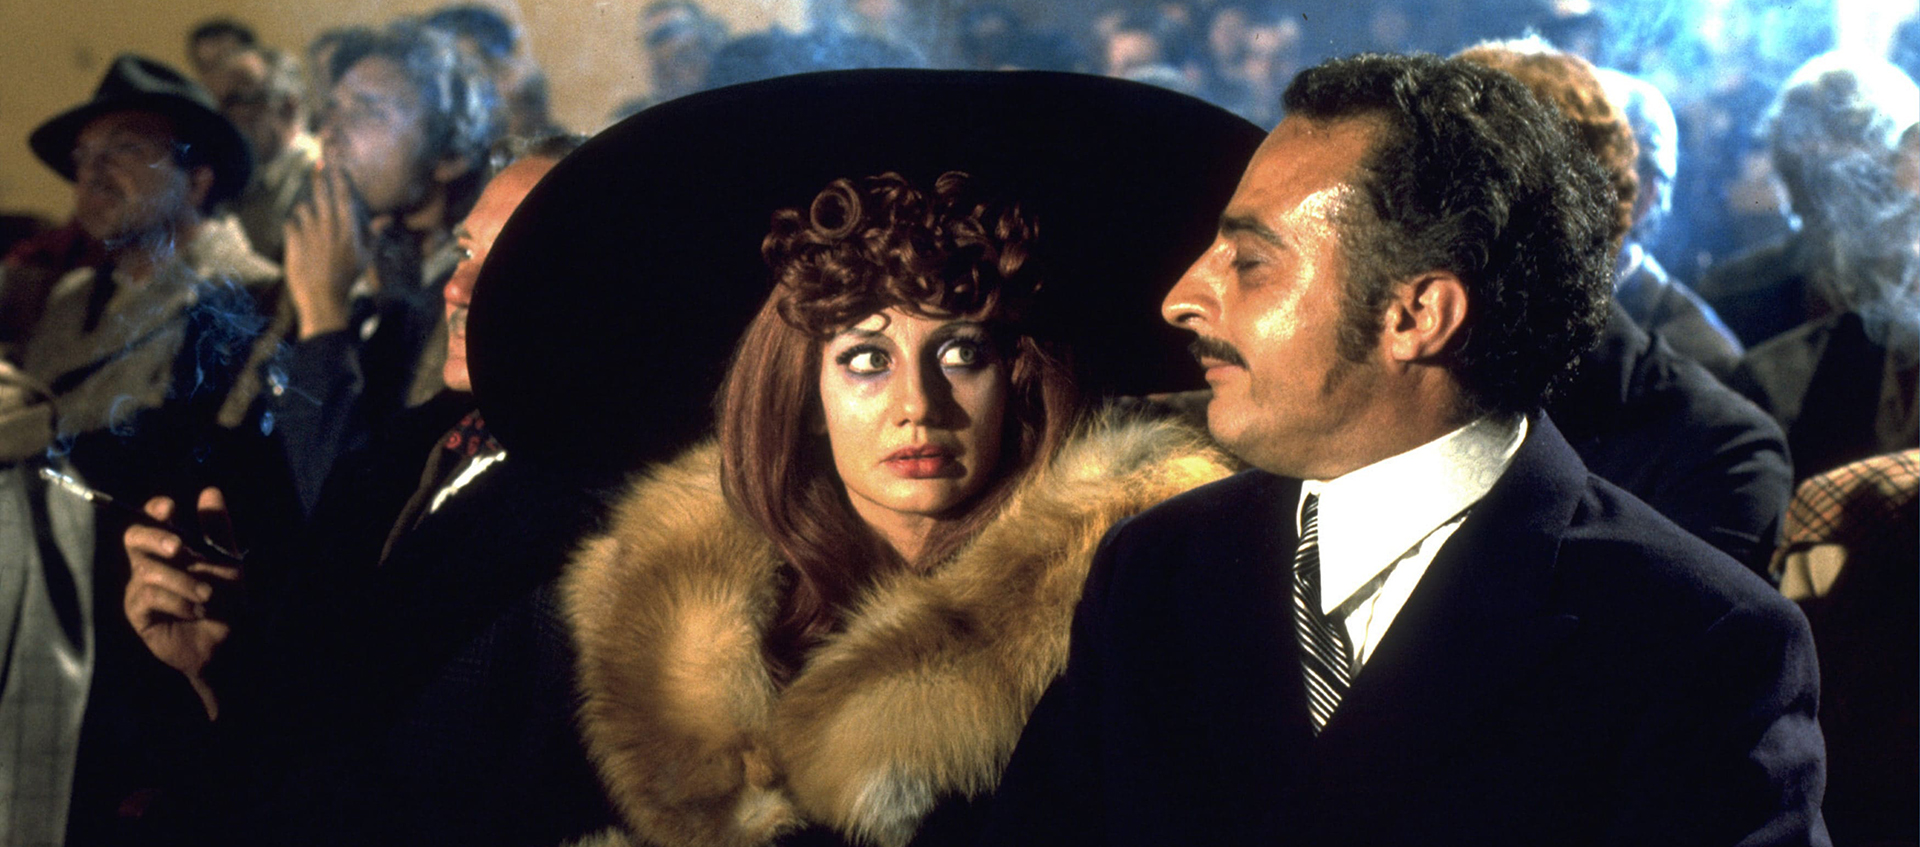 Still featuring Elvira (Cassandra Peterson) sitting next to a man in an audience. She has brownish red hair with curled bangs and is wearing a large black hat and fur coat.